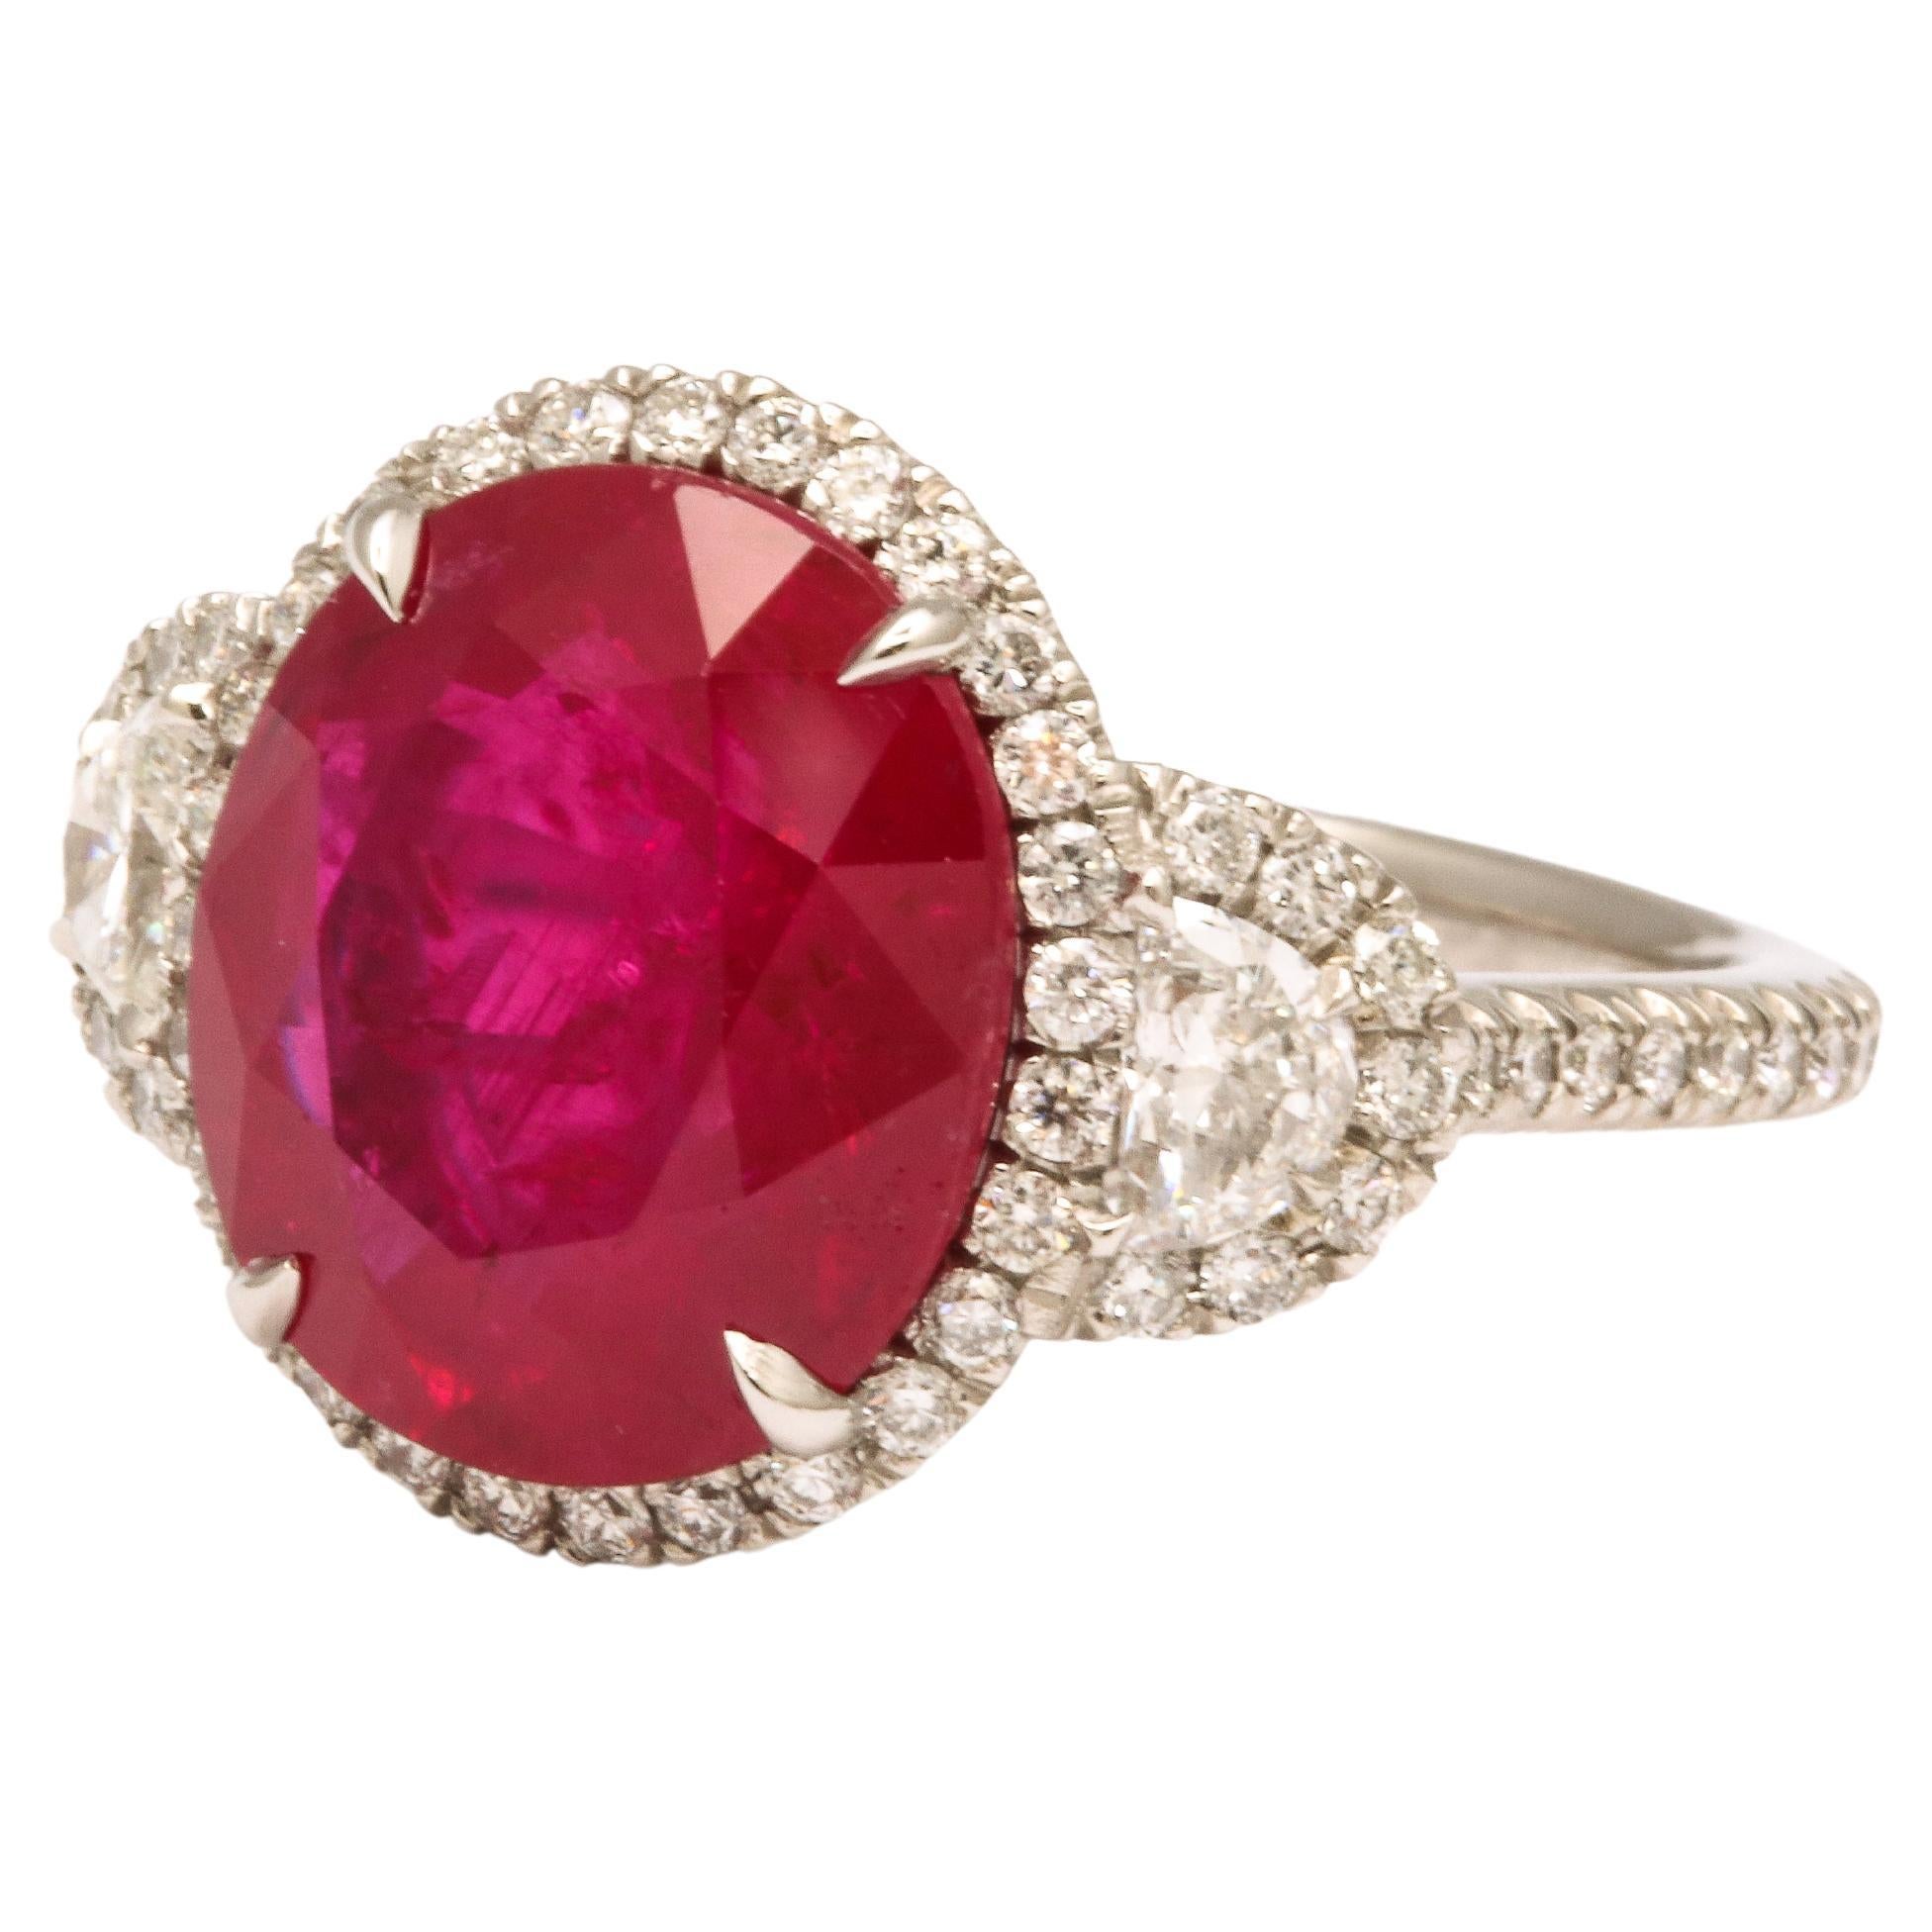 7 Carat Burma Ruby and Diamond Ring For Sale